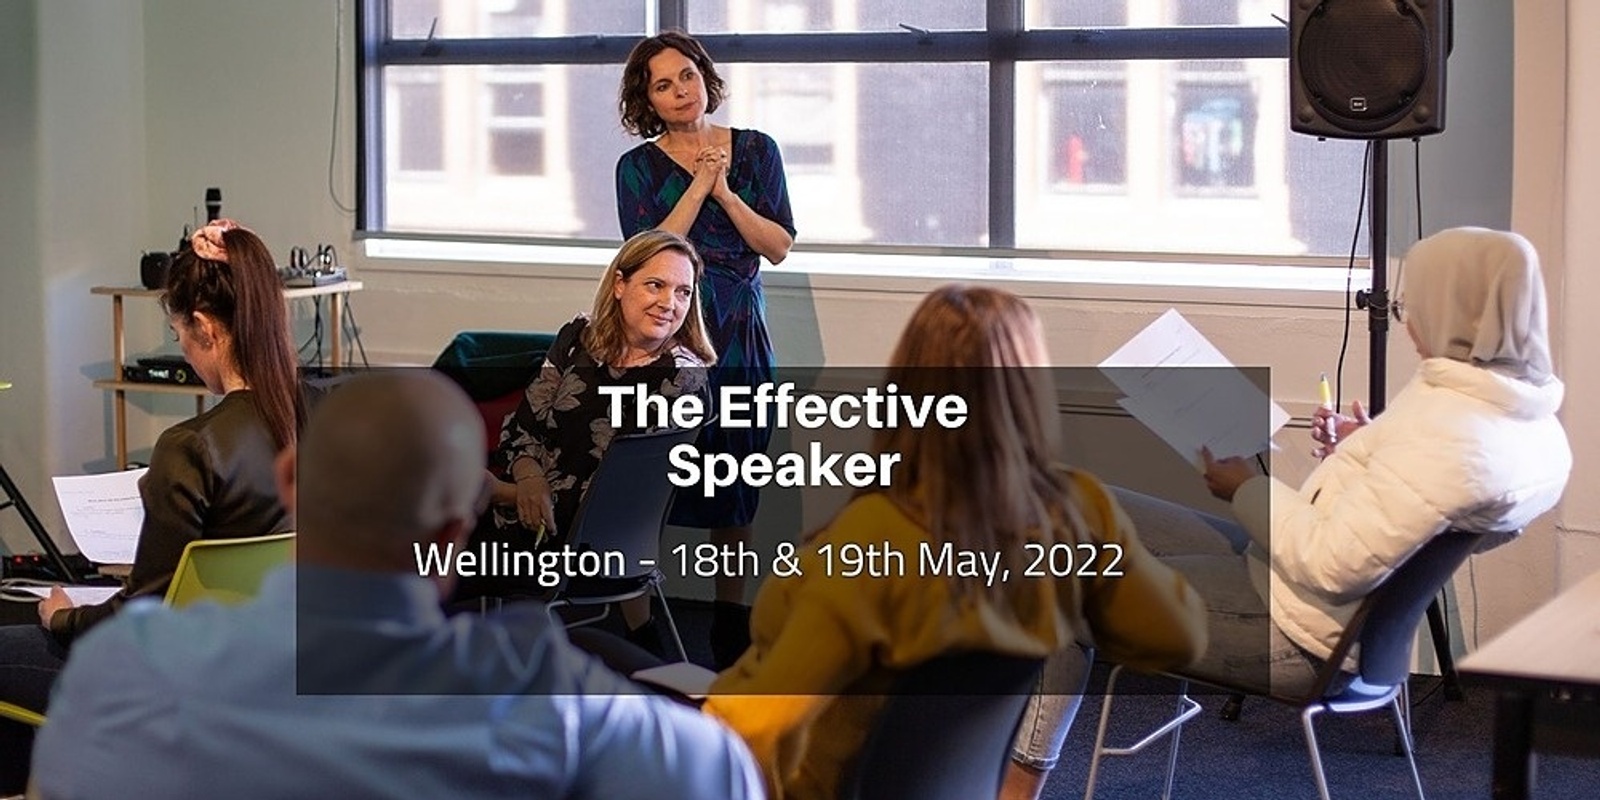 Banner image for The Effective Speaker, Wellington. 18th & 19th May 2022